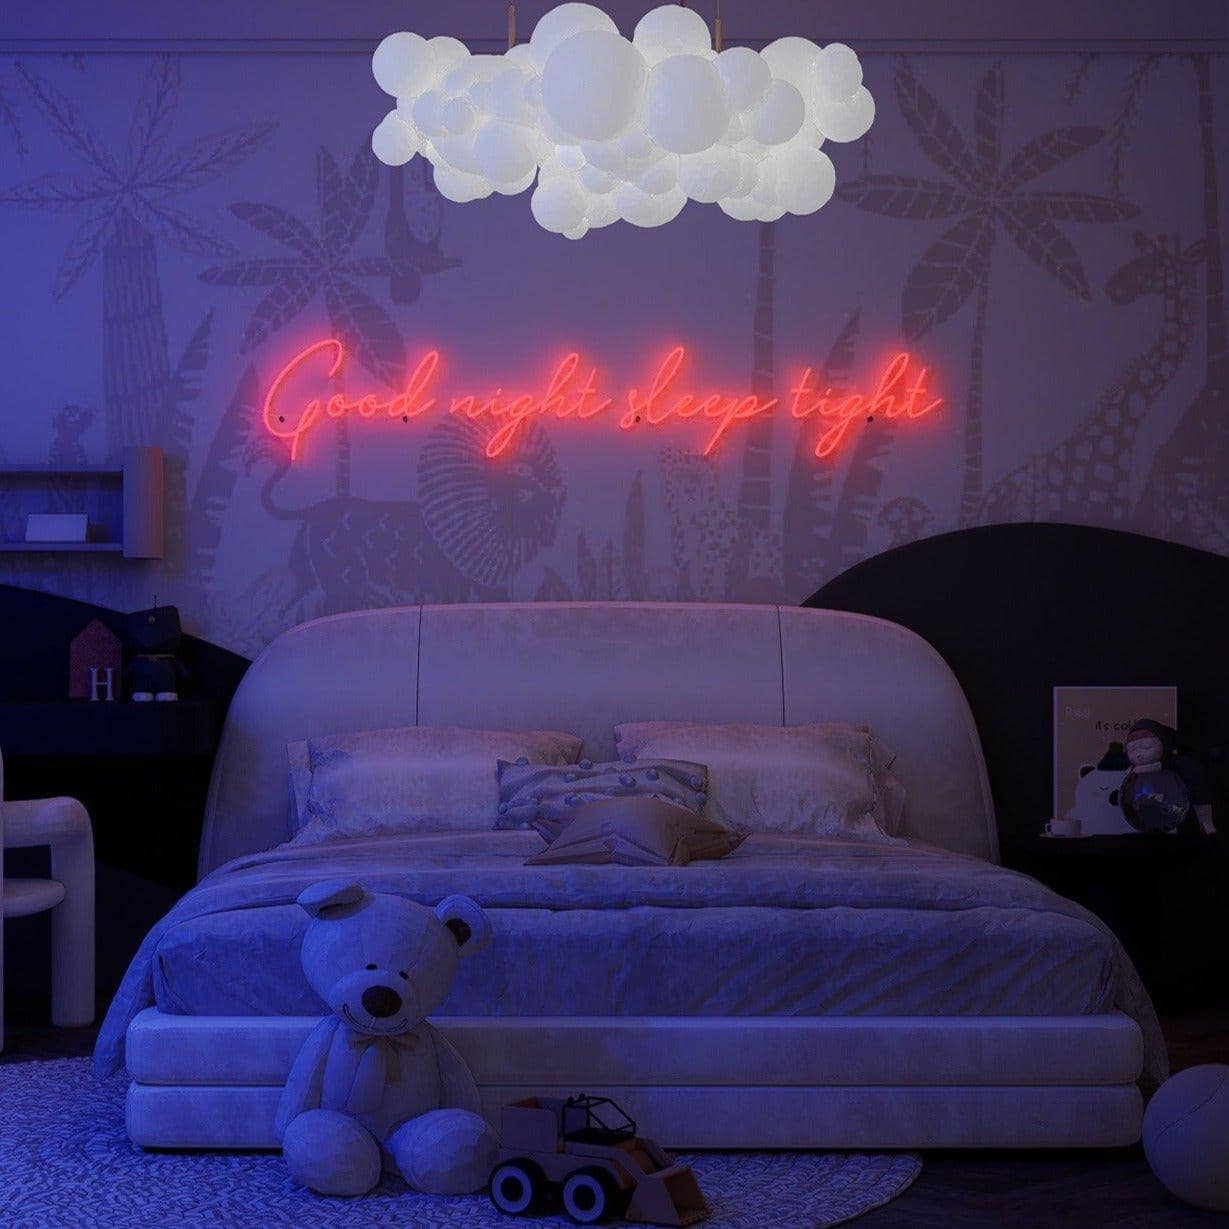 red-neon-picture-lit-up-at-night-for-display-on-the-wall-good-night-sleep-tight